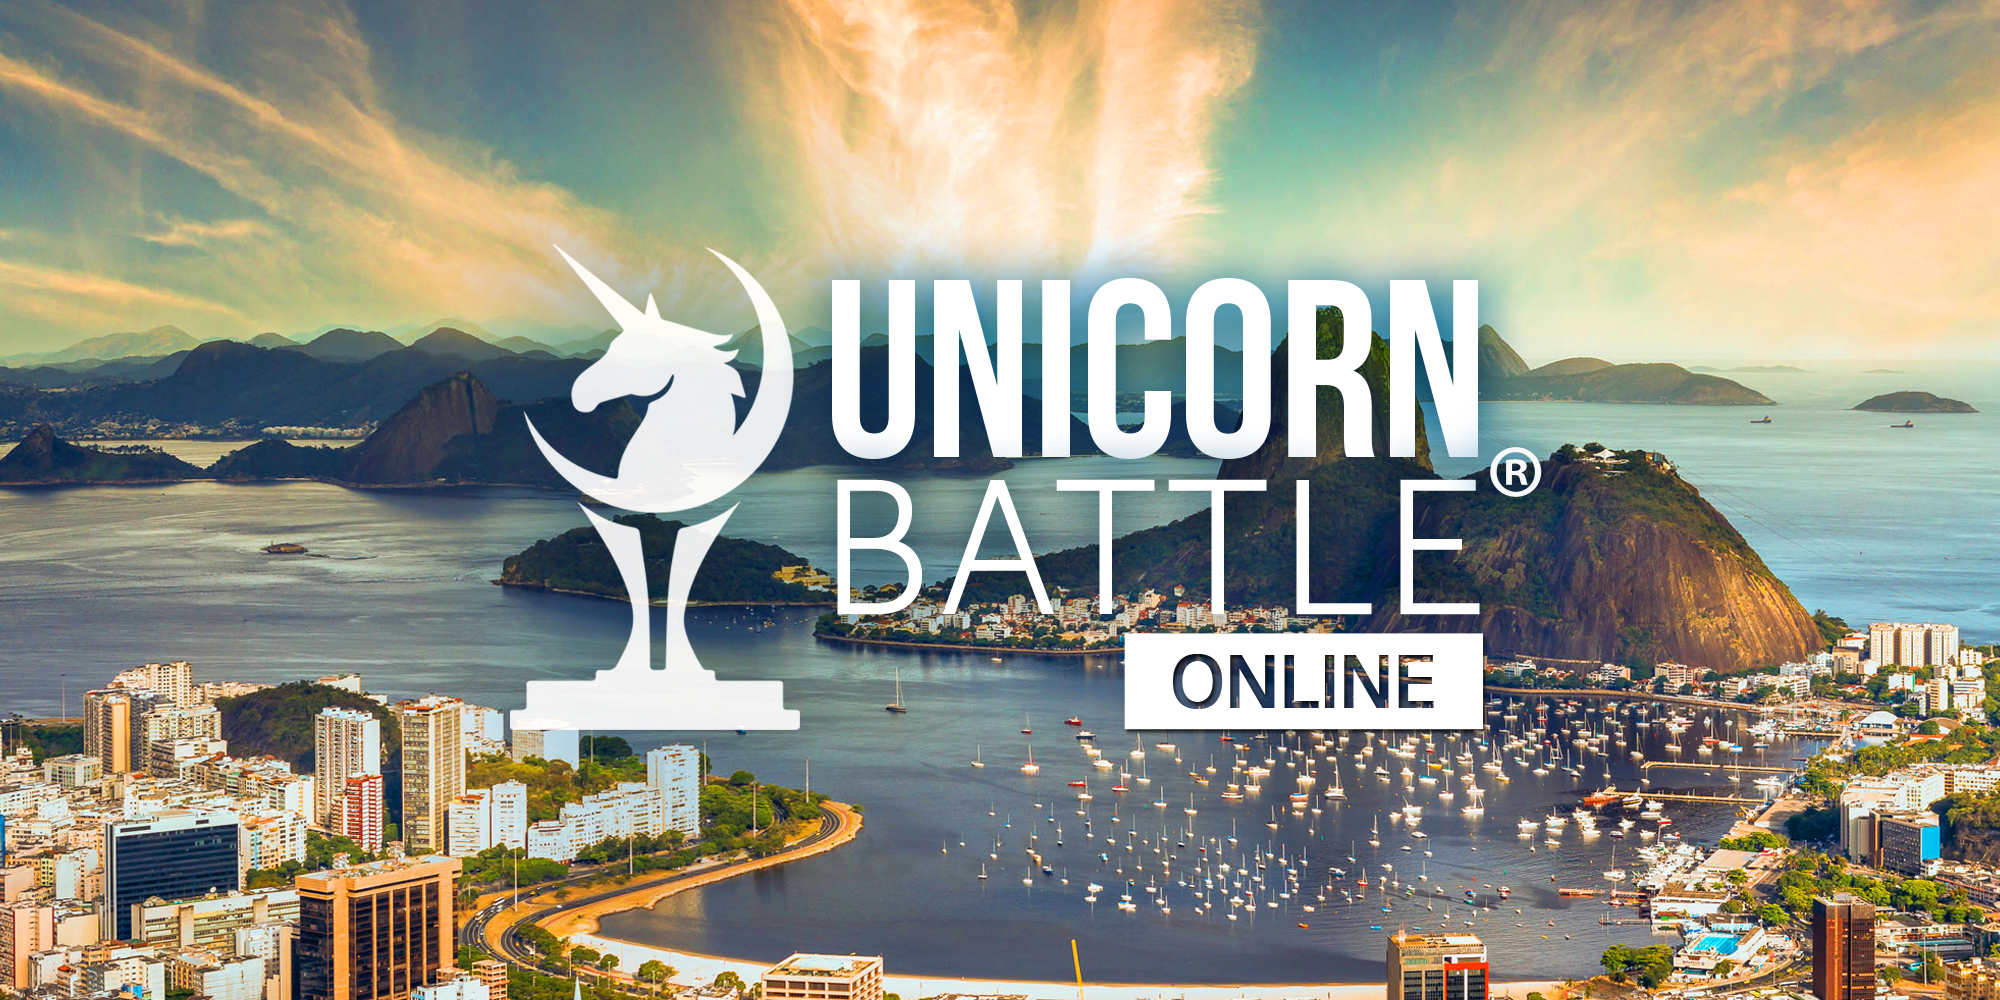 246 Unicorn Battle in Latin America February 02 2021 - events for startups, investors and professionals